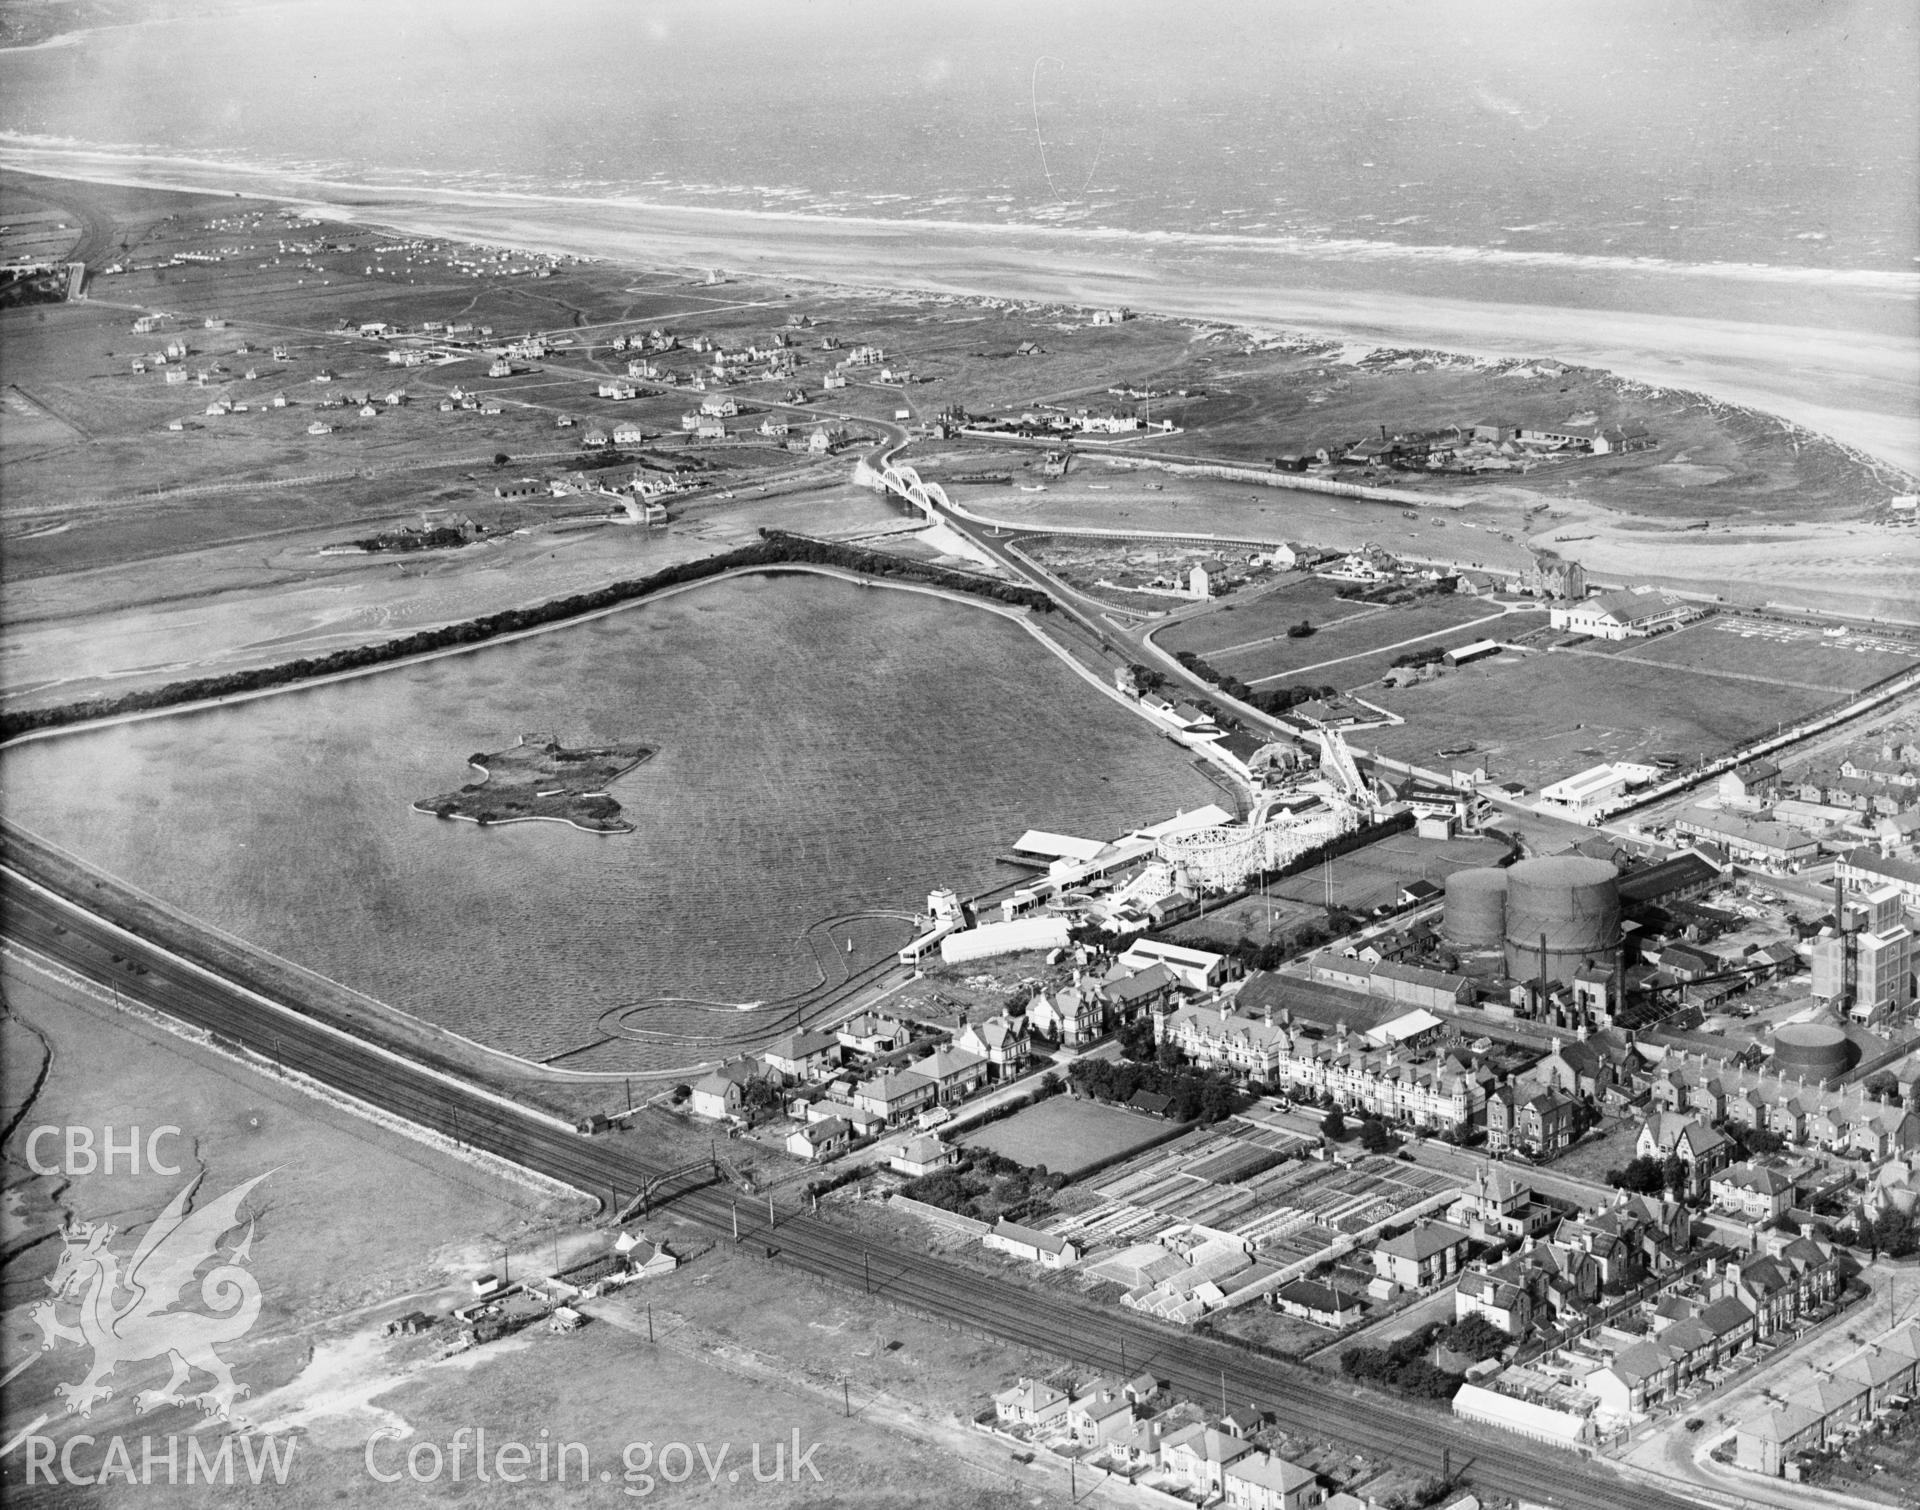 View of Rhyl showing the Marine Lake and funfair, oblique aerial view. 5?x4? black and white glass plate negative.